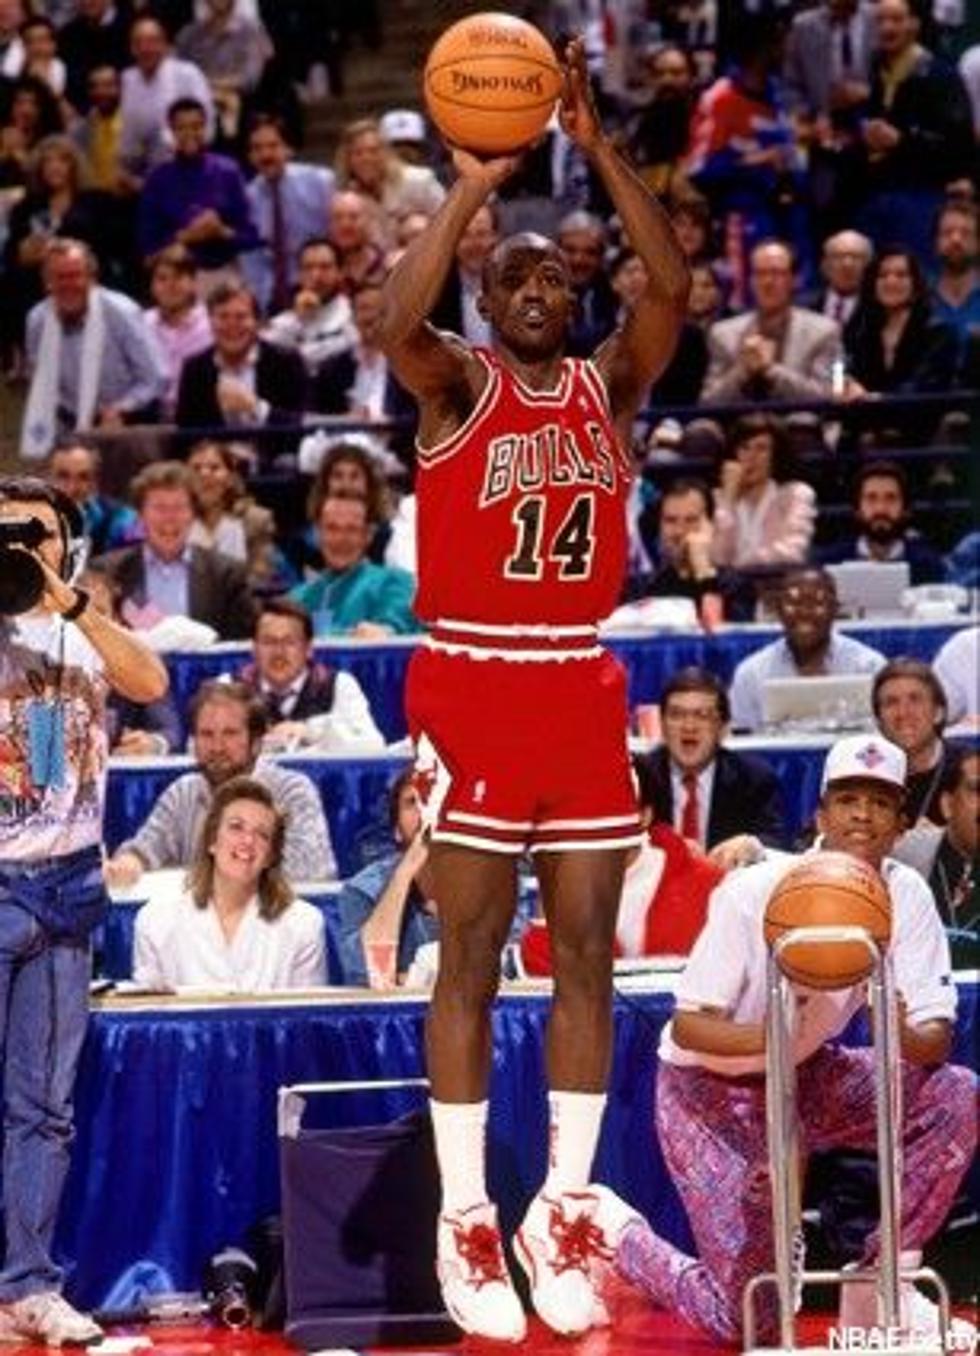 Earn a chance to beat Craig Hodges in 3-point shooting